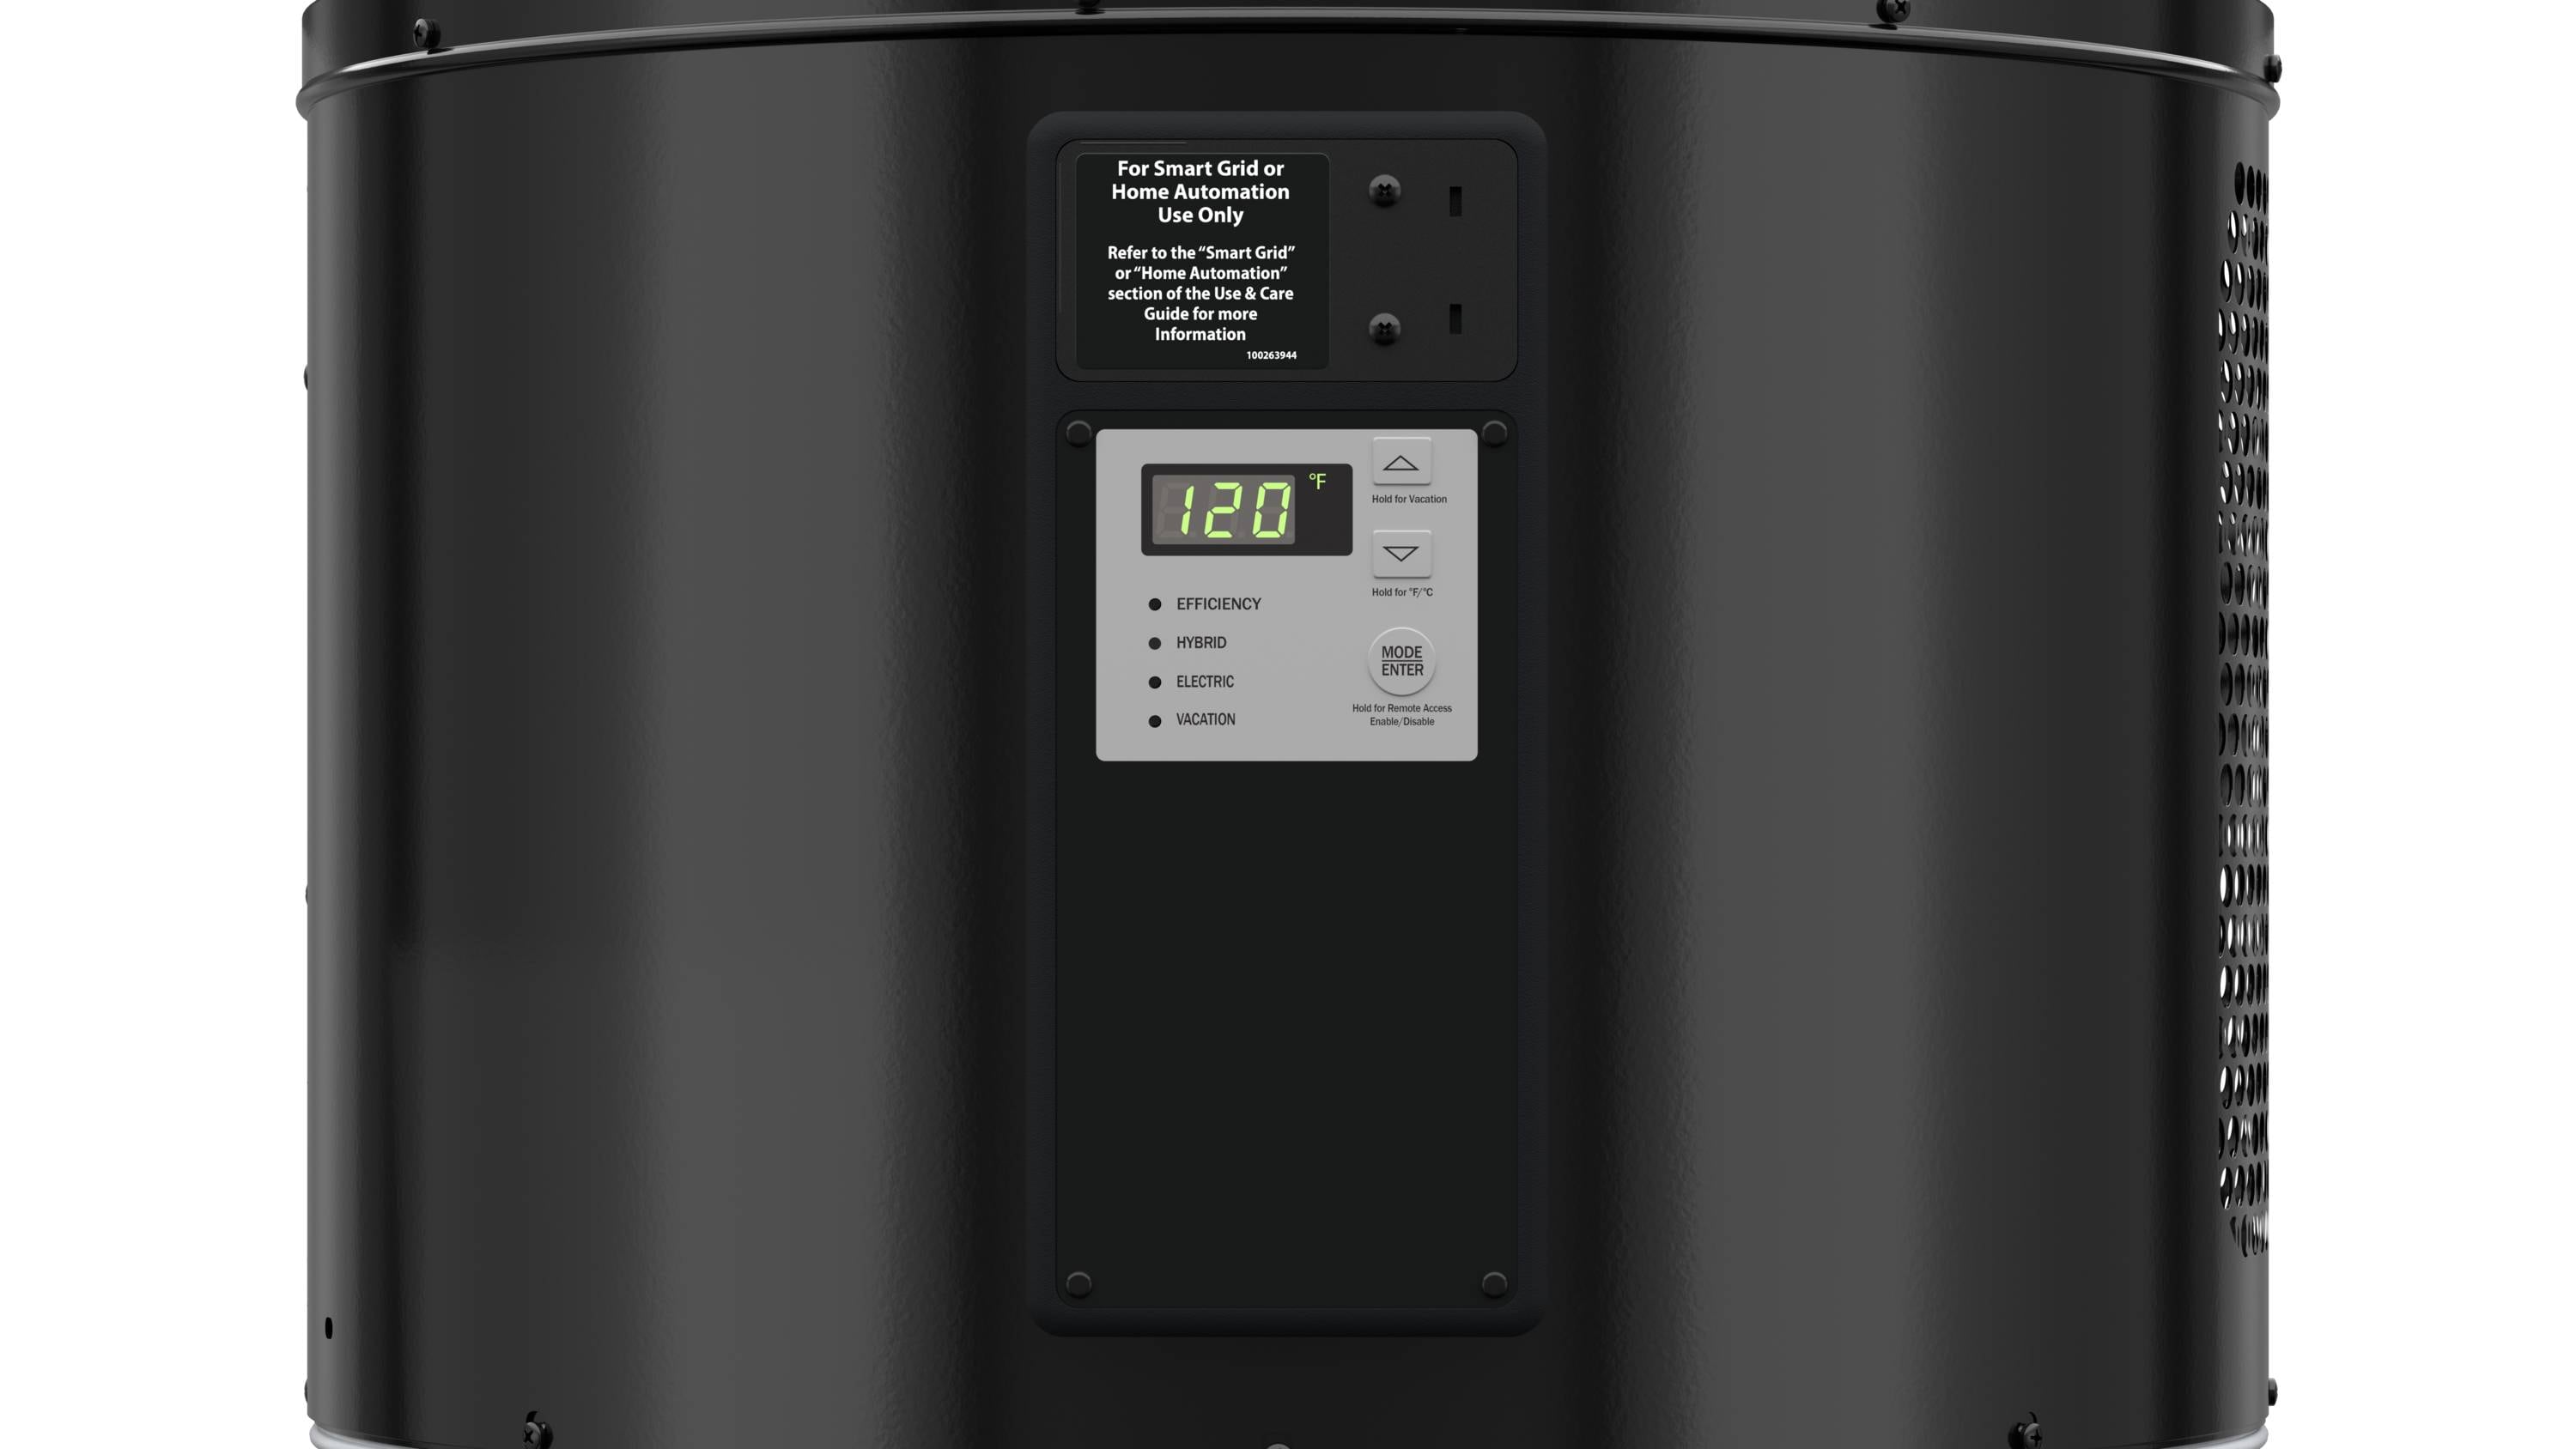 Select® 50-Gallon Electric Water Heater